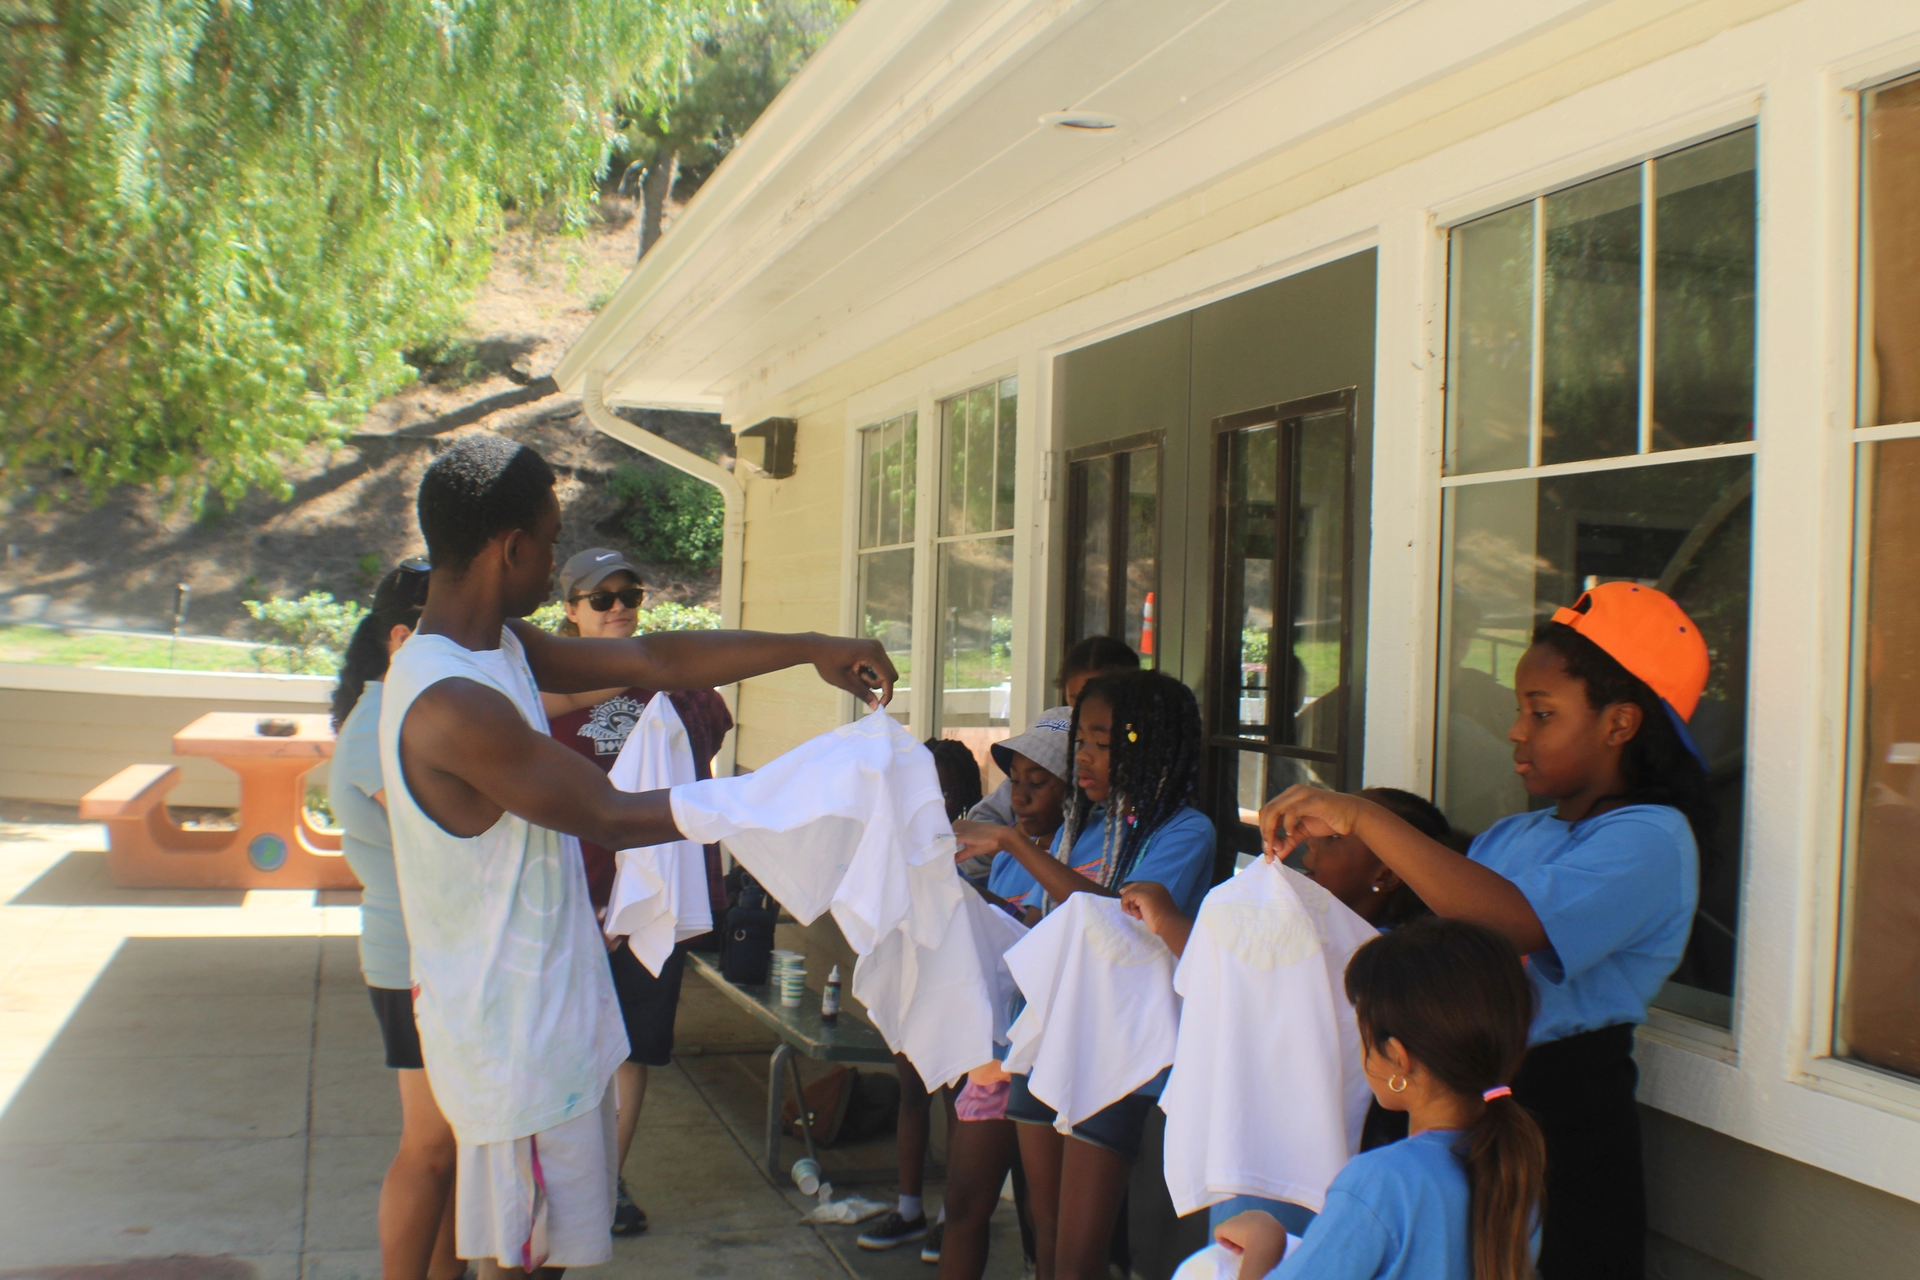 Camp Hollywoodland Staff shows children how to tie day their camp shirts